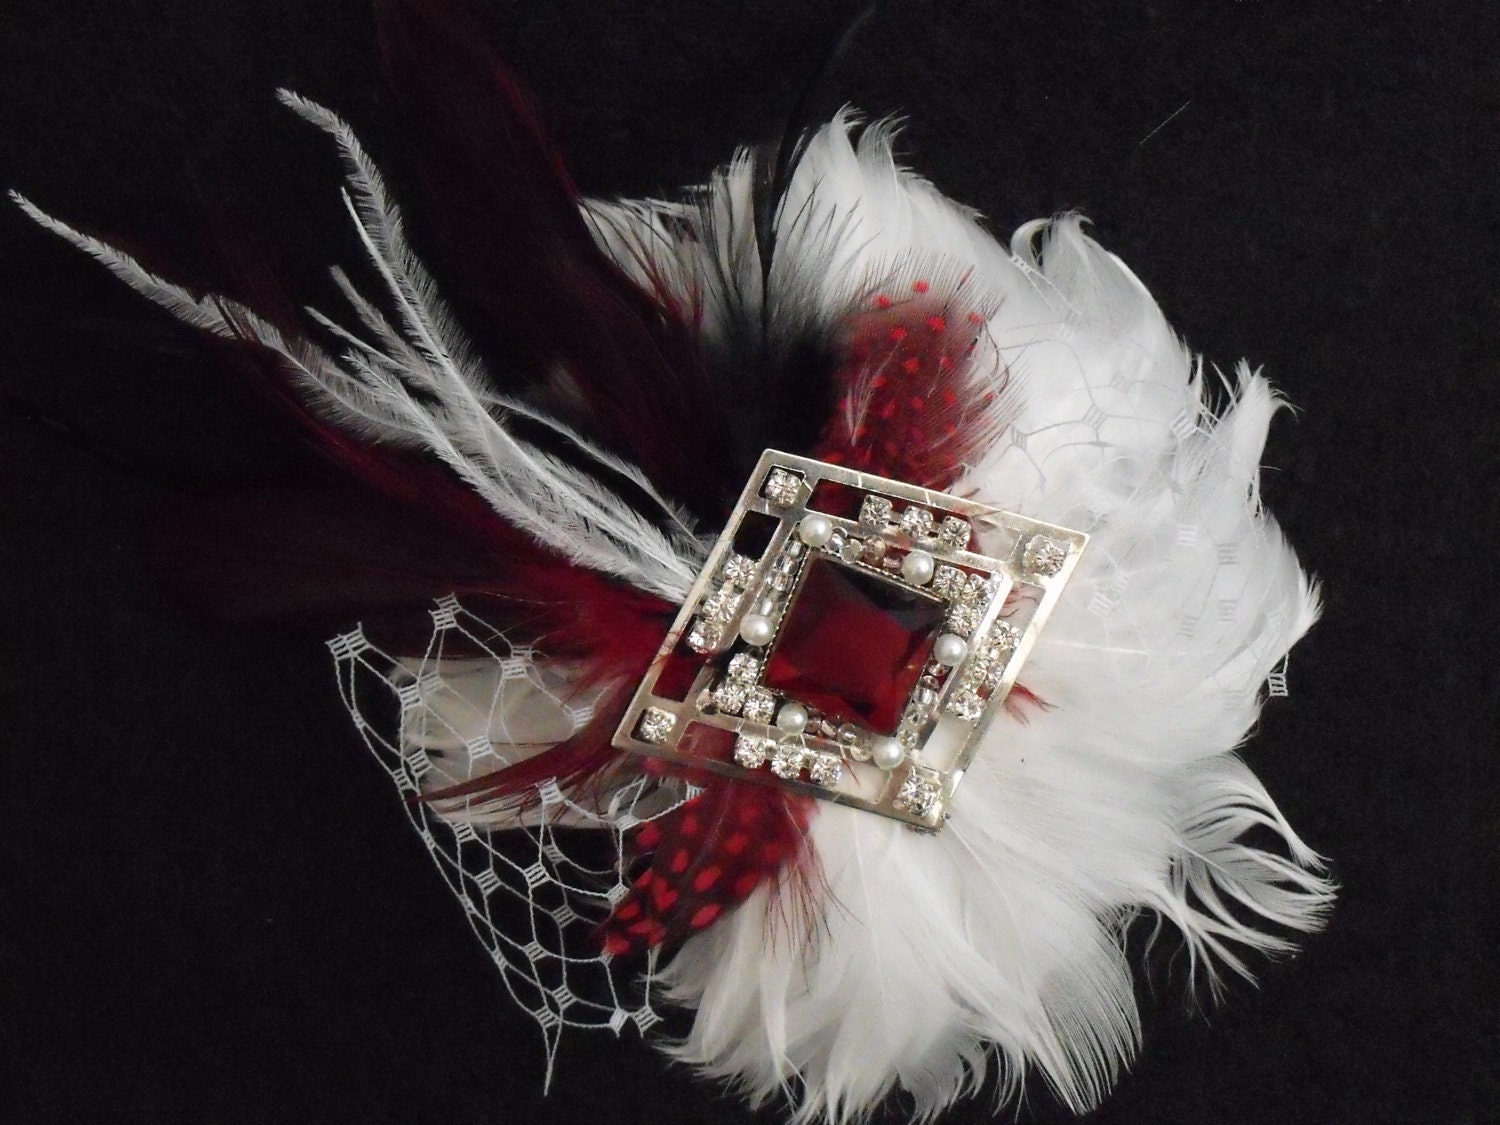  Black FeatherWhite Feather and RedFrench netting accents Newly 